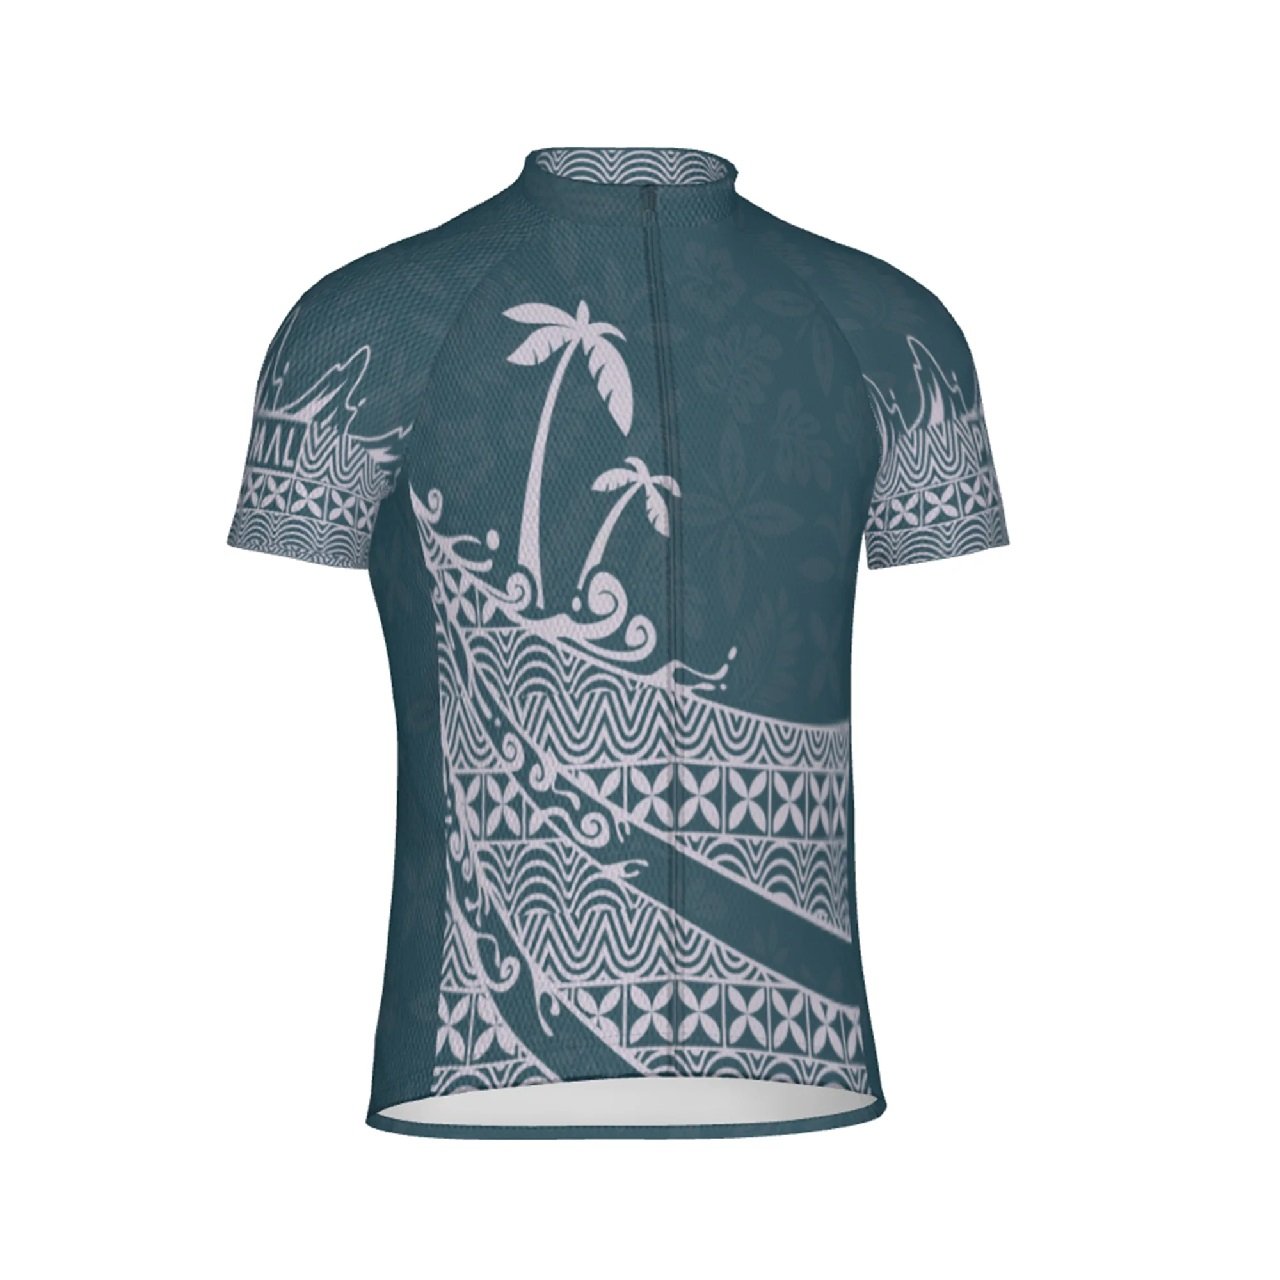 Cycling Jersey Tropical Patterns Men's Sport Cut Jersey by Primal